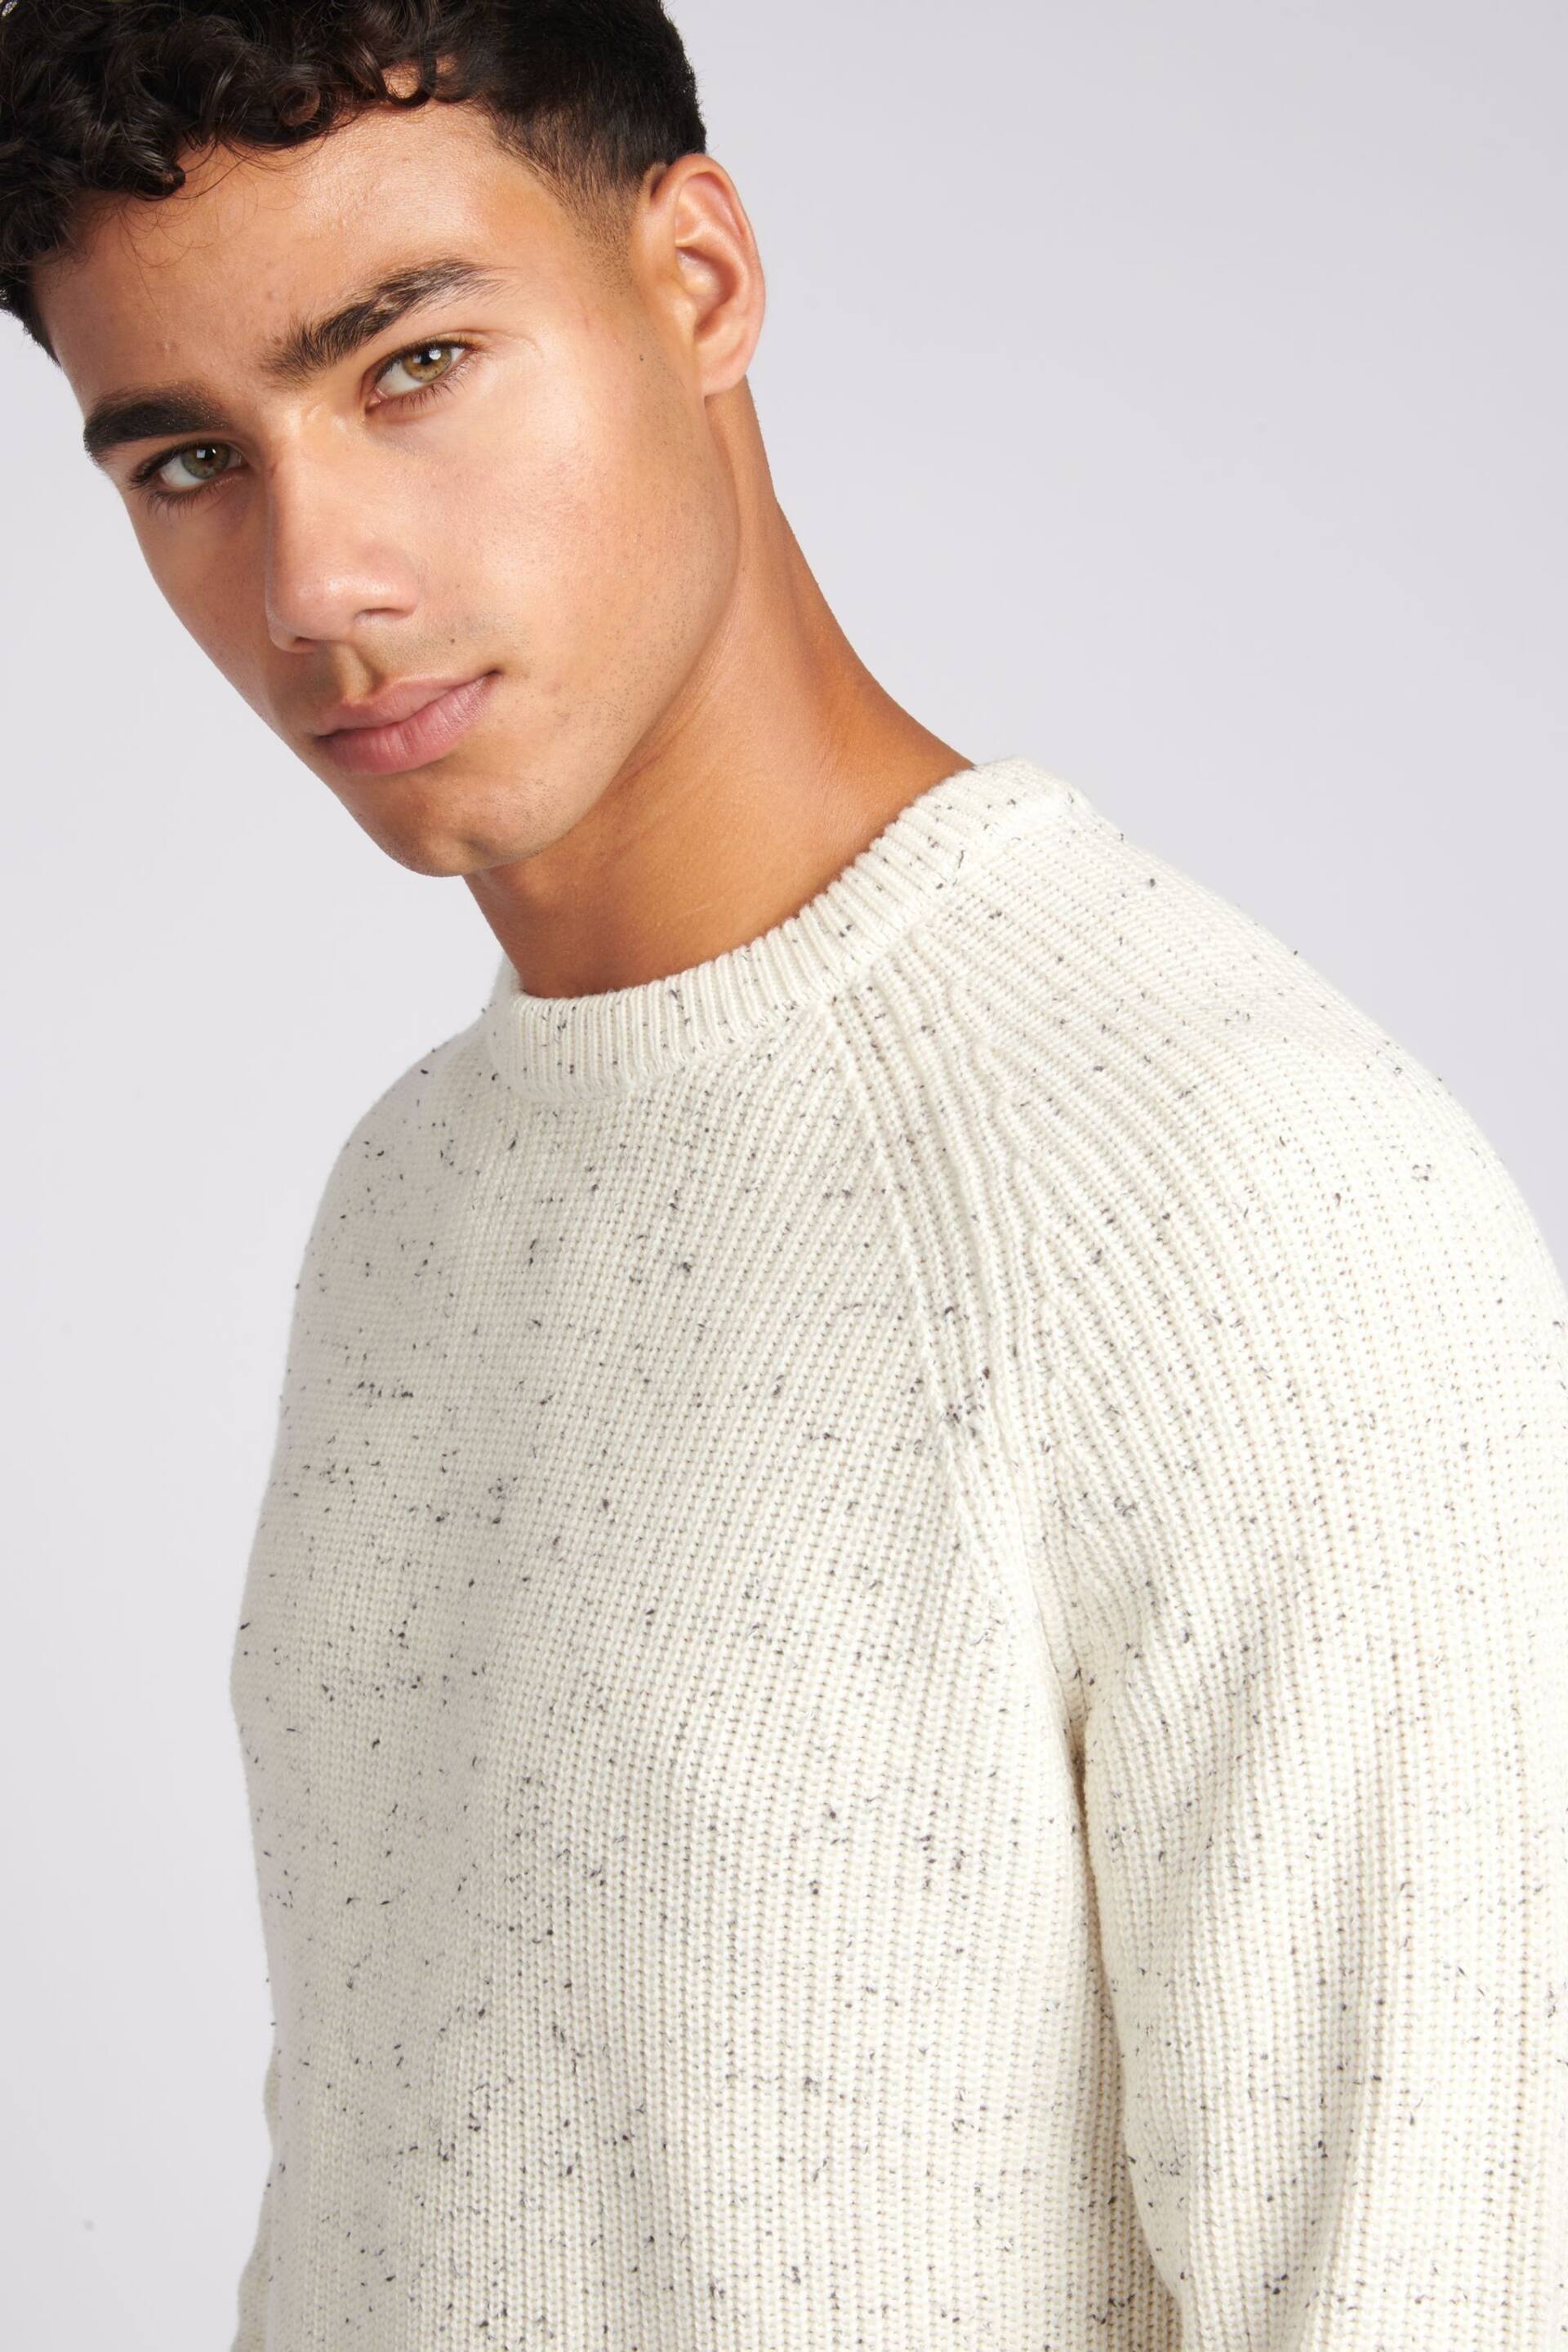 U.S. Polo Assn. Mens Cream Fisherman Nepp Knitted Jumper - Image 4 of 8